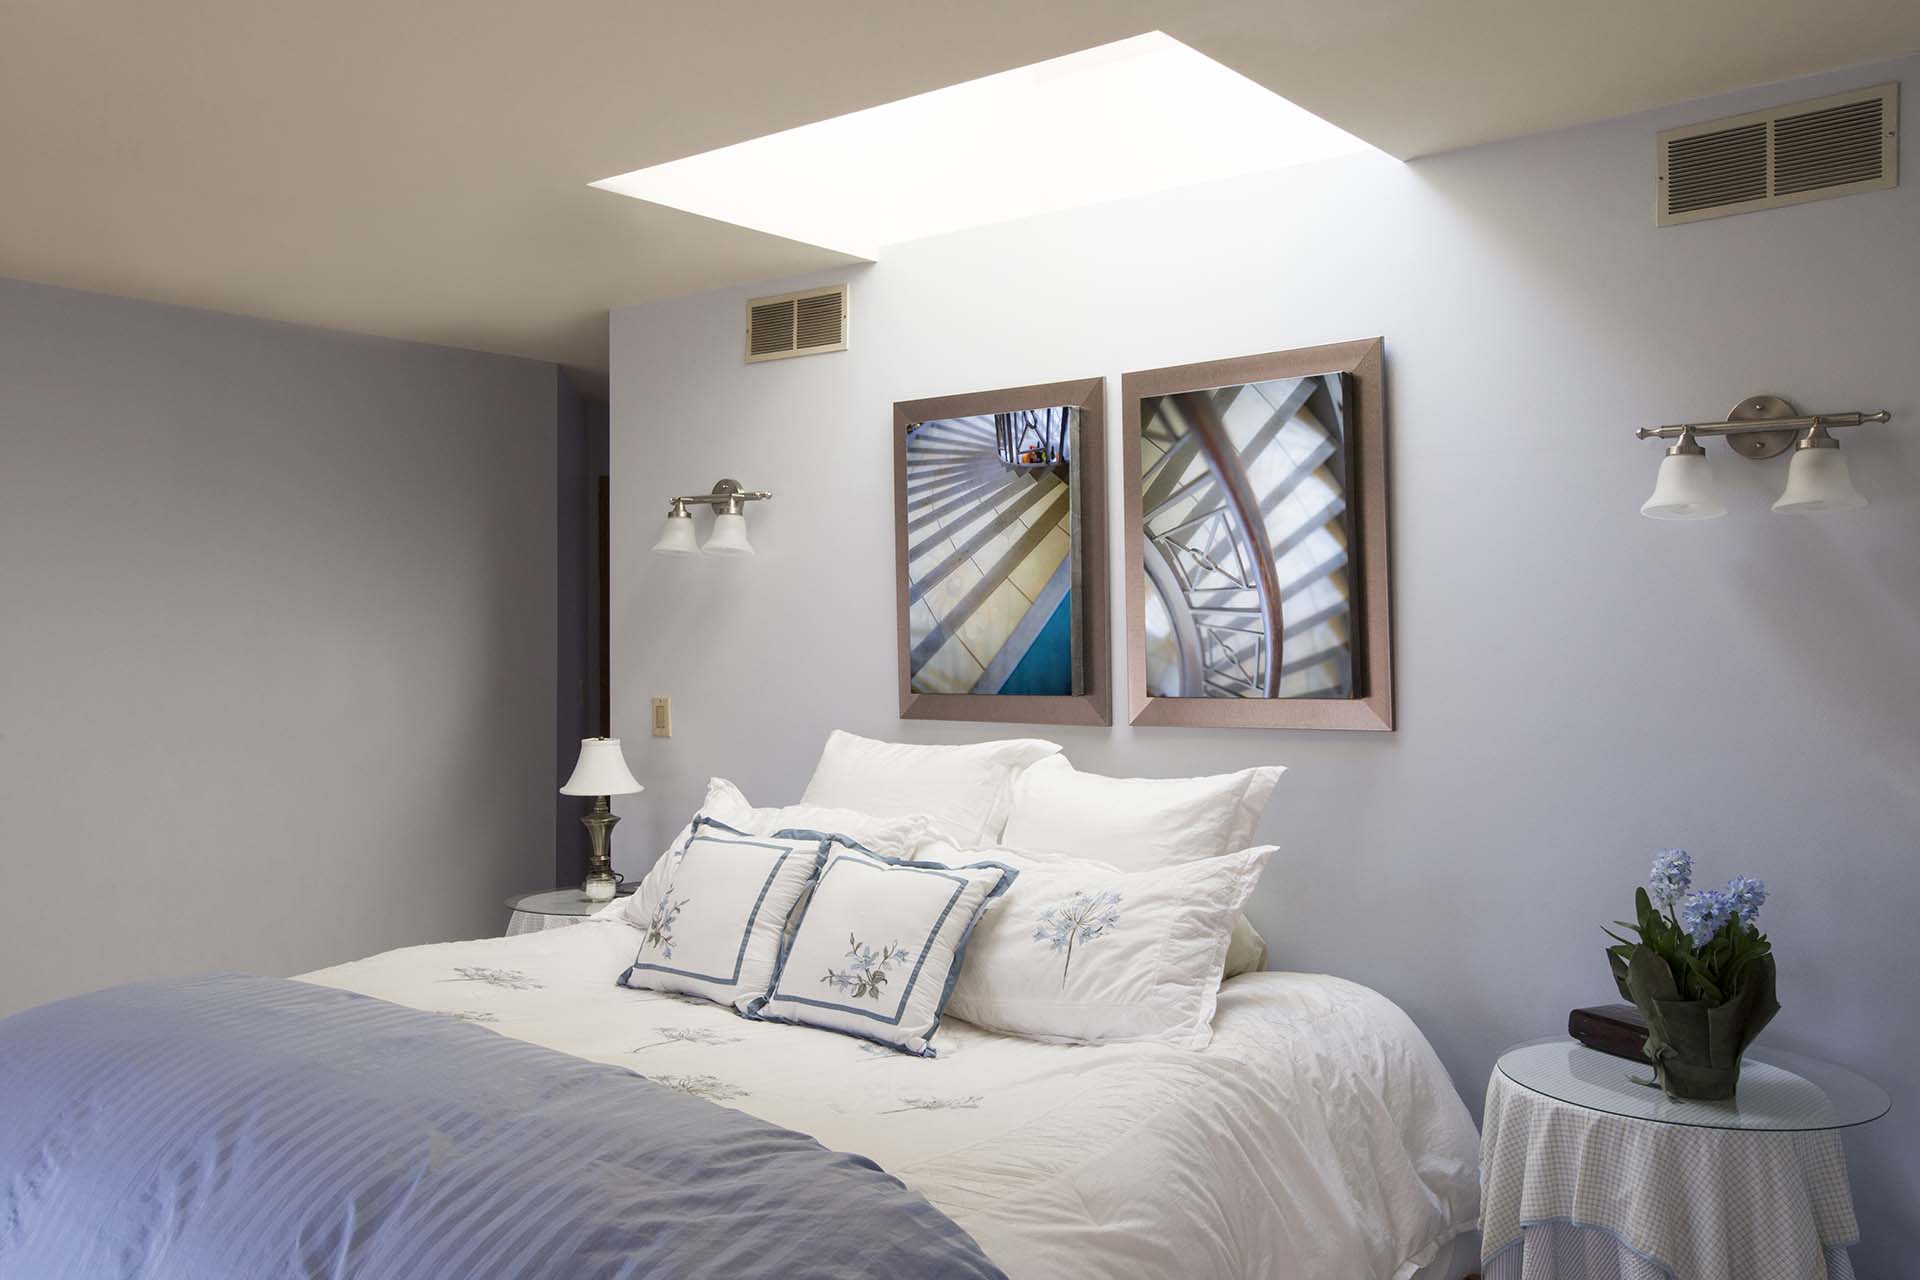 What Skylights Can Do For You?